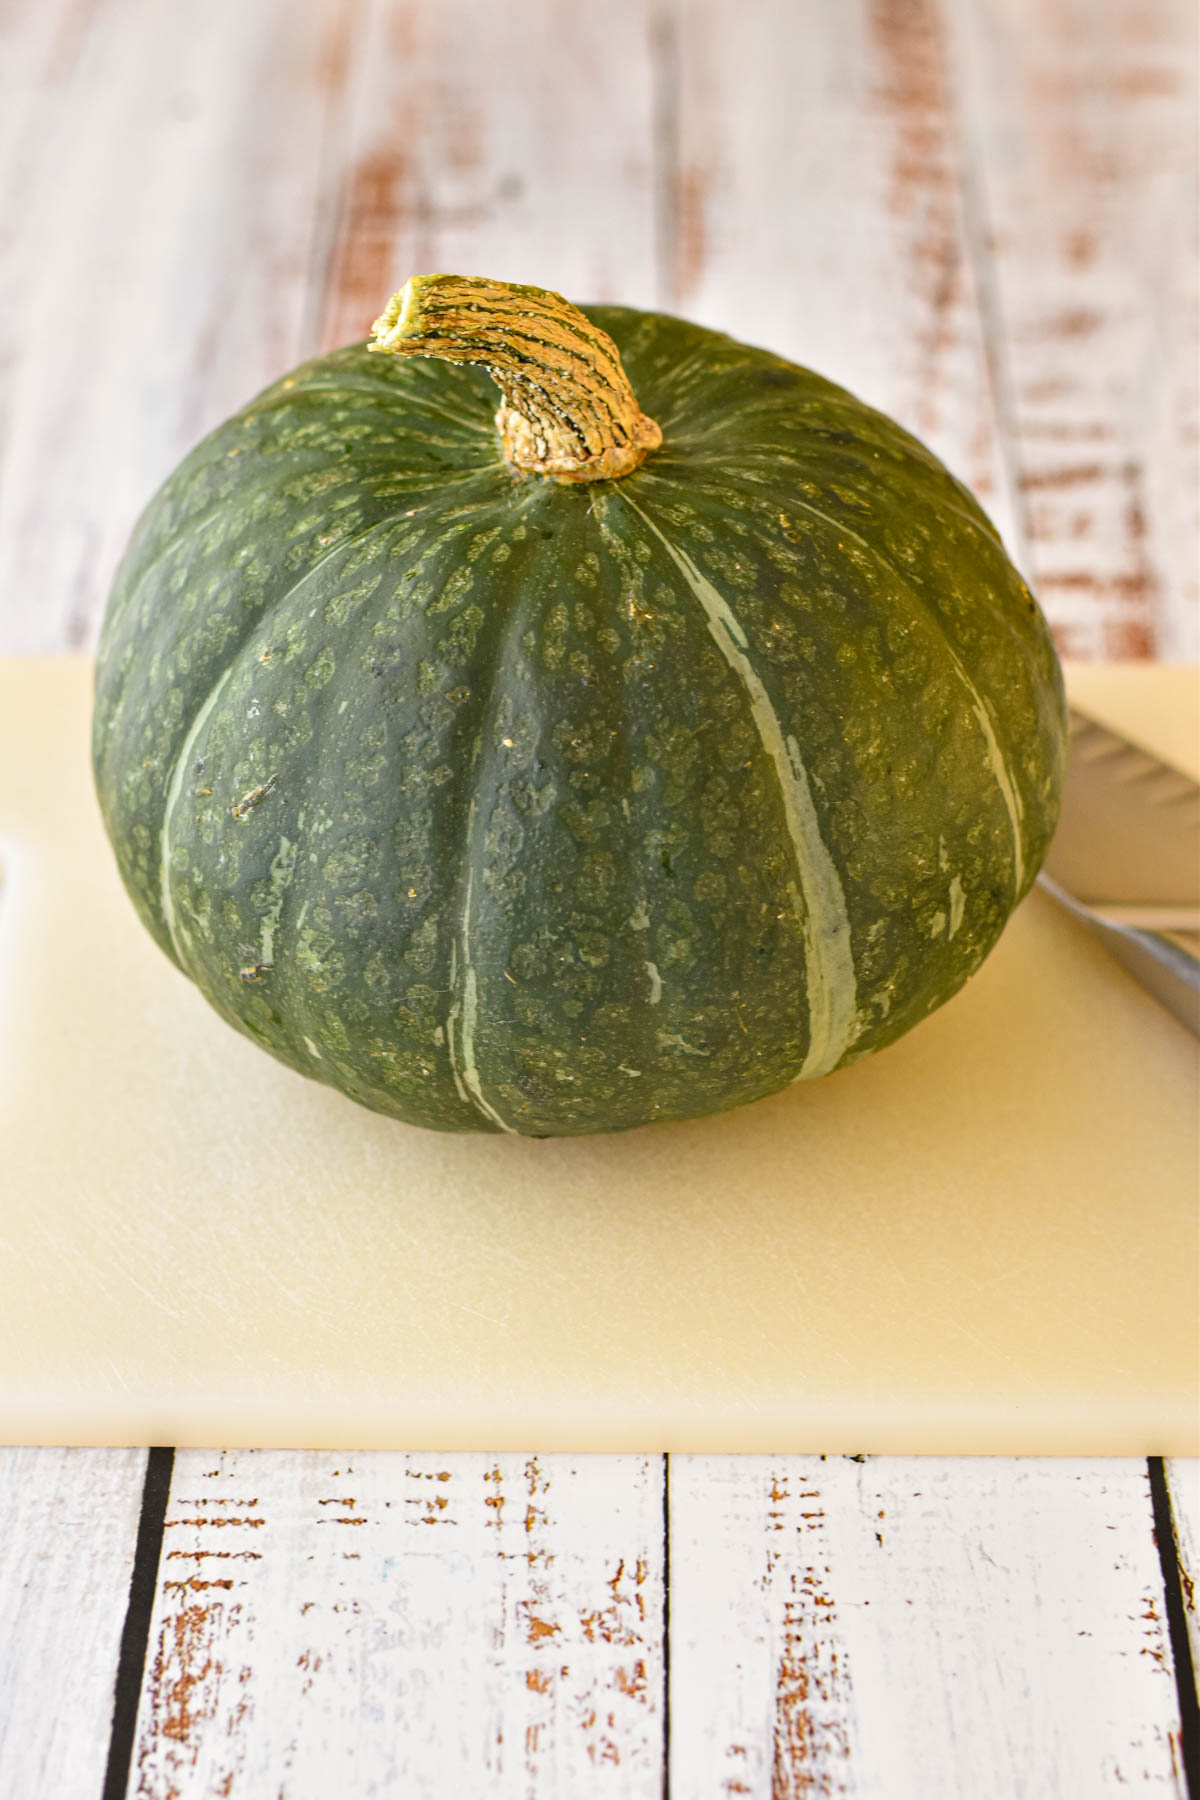 a kabocha squash / Japanese pumpkin on a white cutting board with a knife prior to chopping.